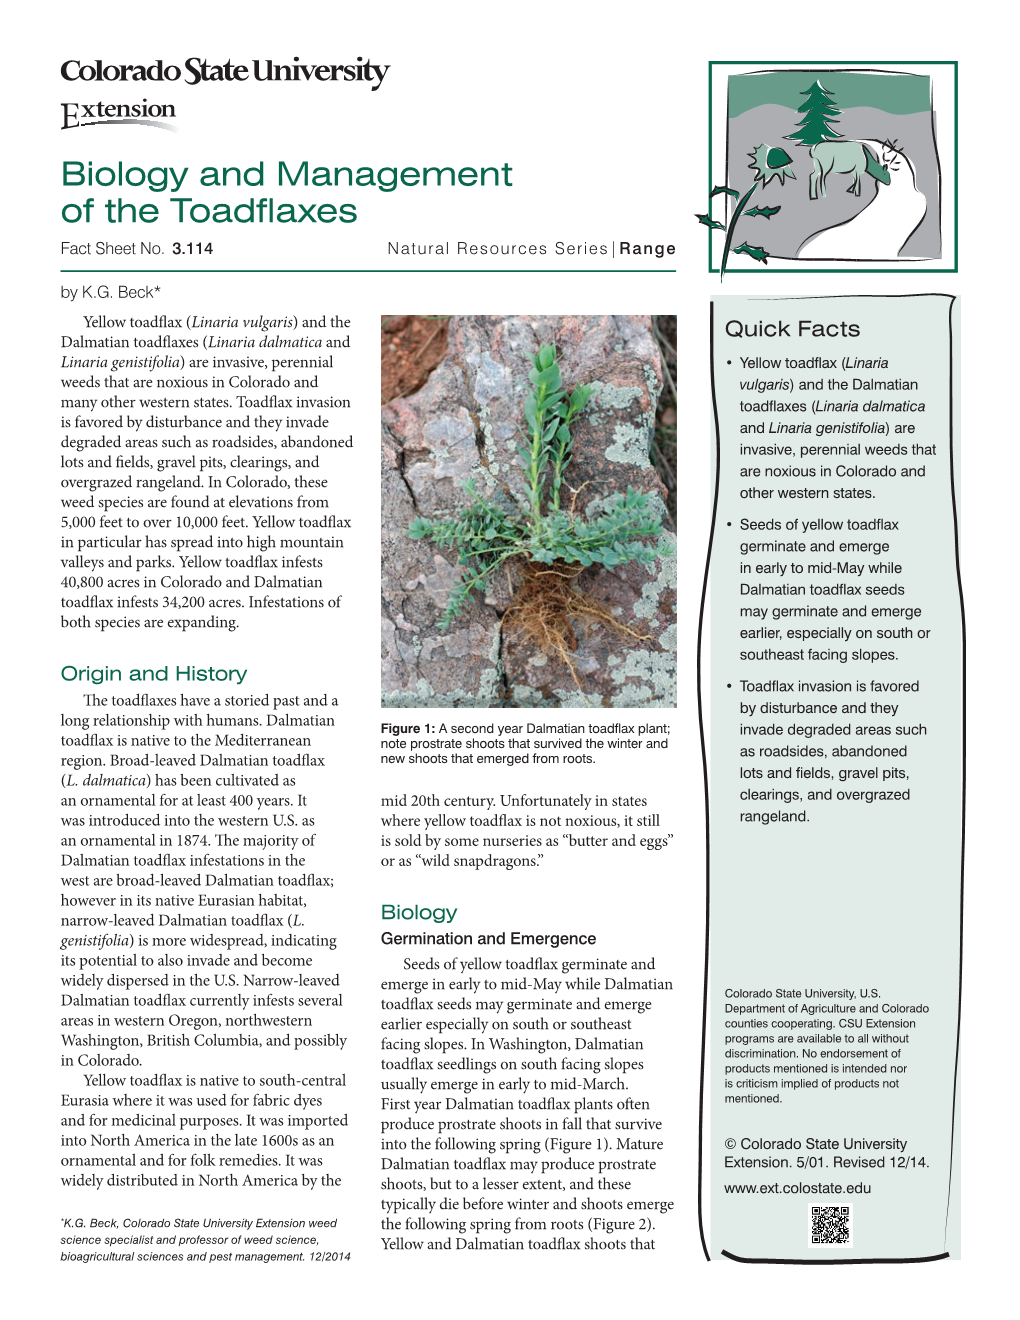 Biology and Management of the Toadflaxes Fact Sheet No